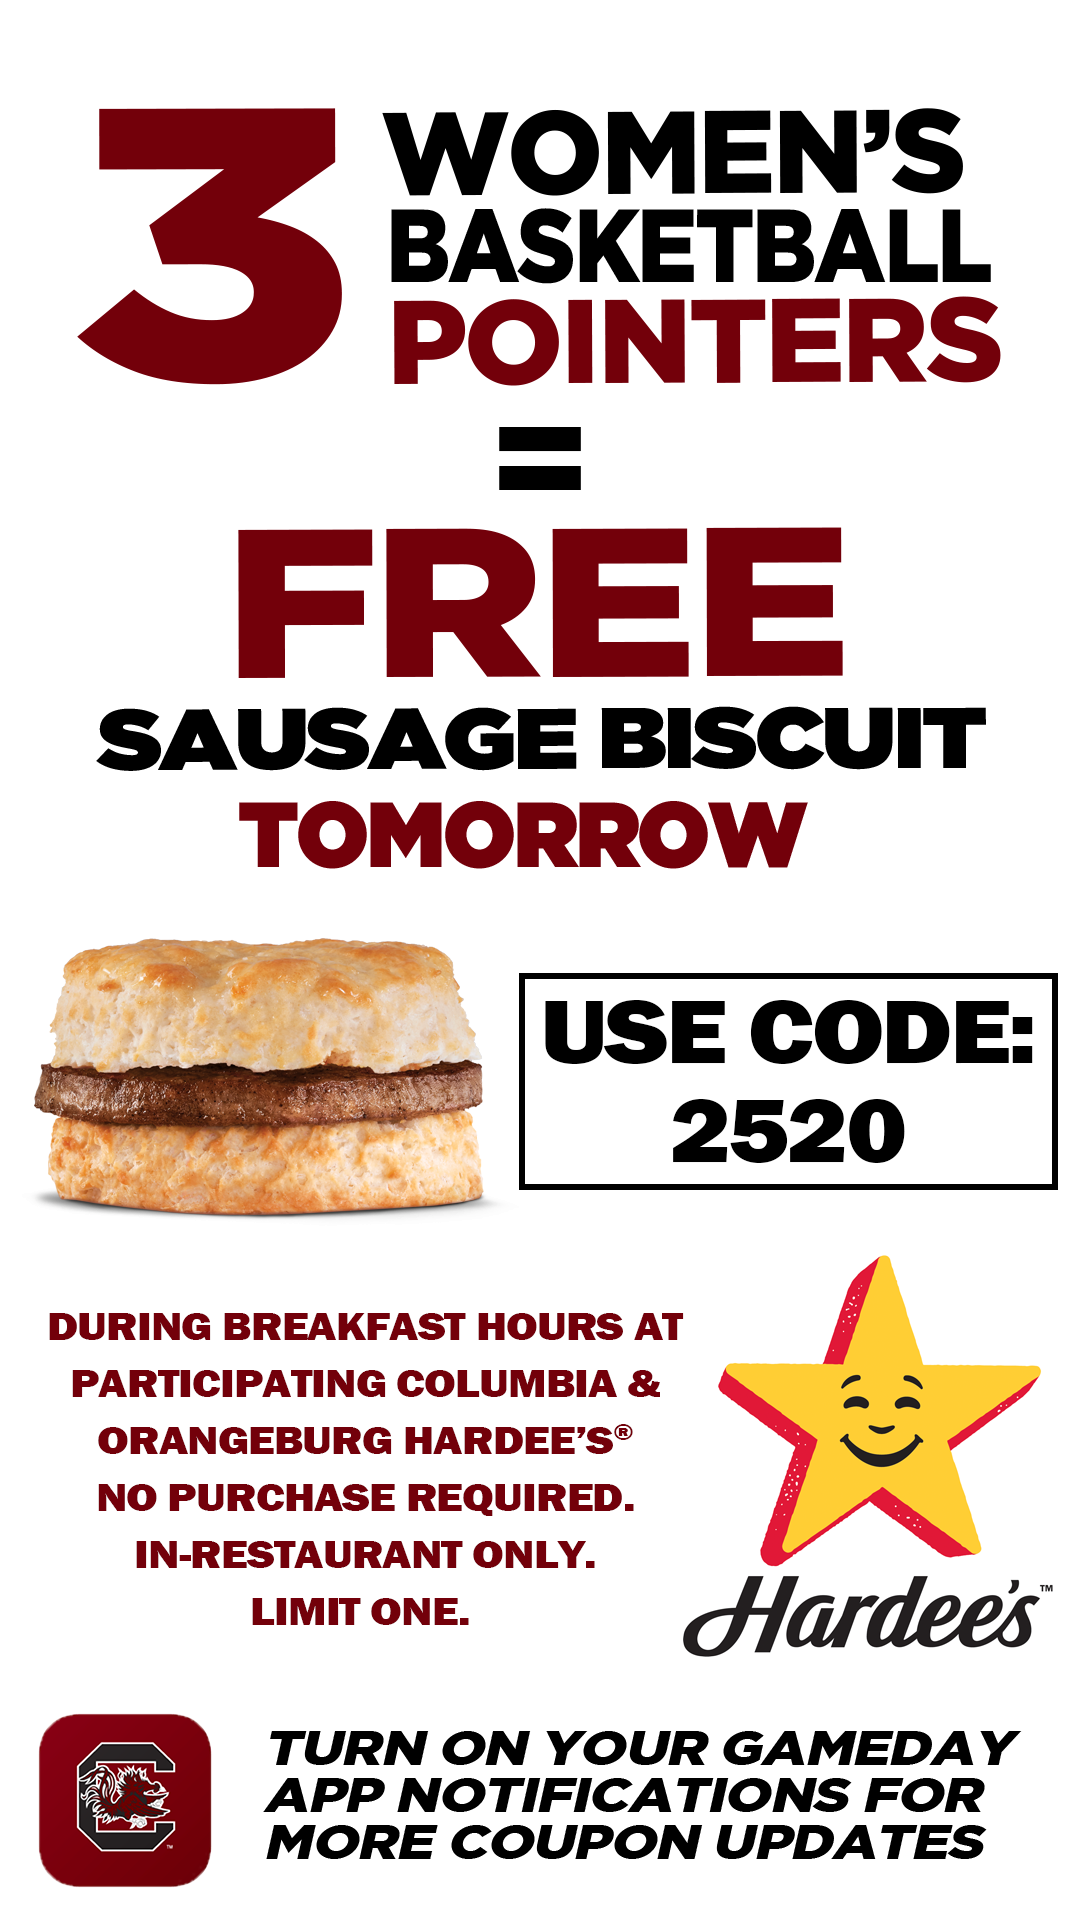 Hardees Free Sausage Biscuit Graphic